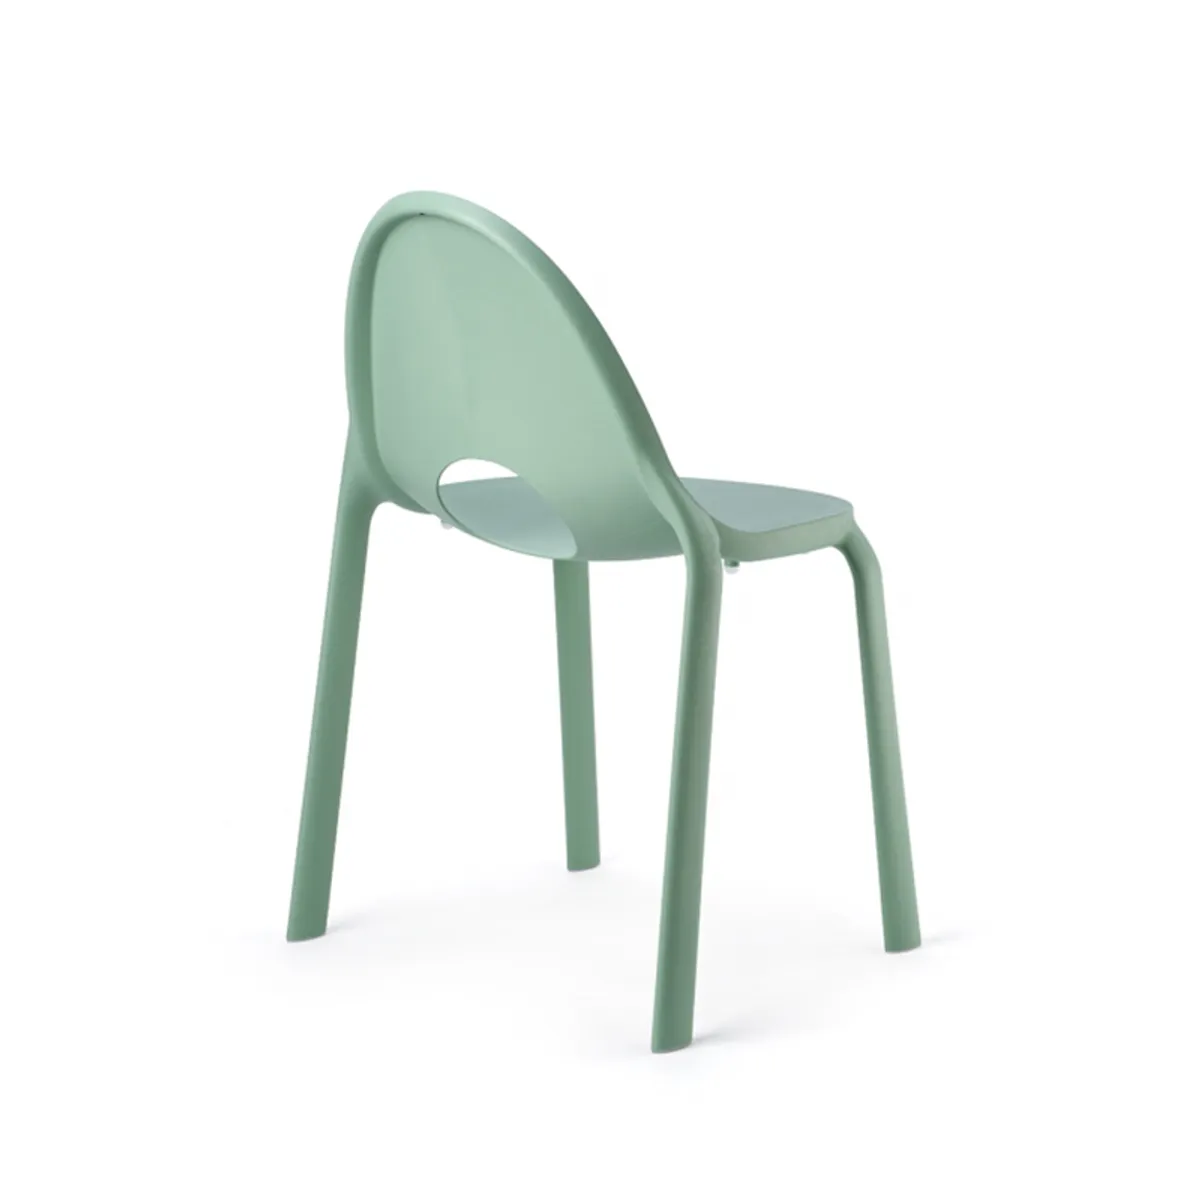 Droplet Chair Pp557 C Light Teal 02 Inside Out Contracts